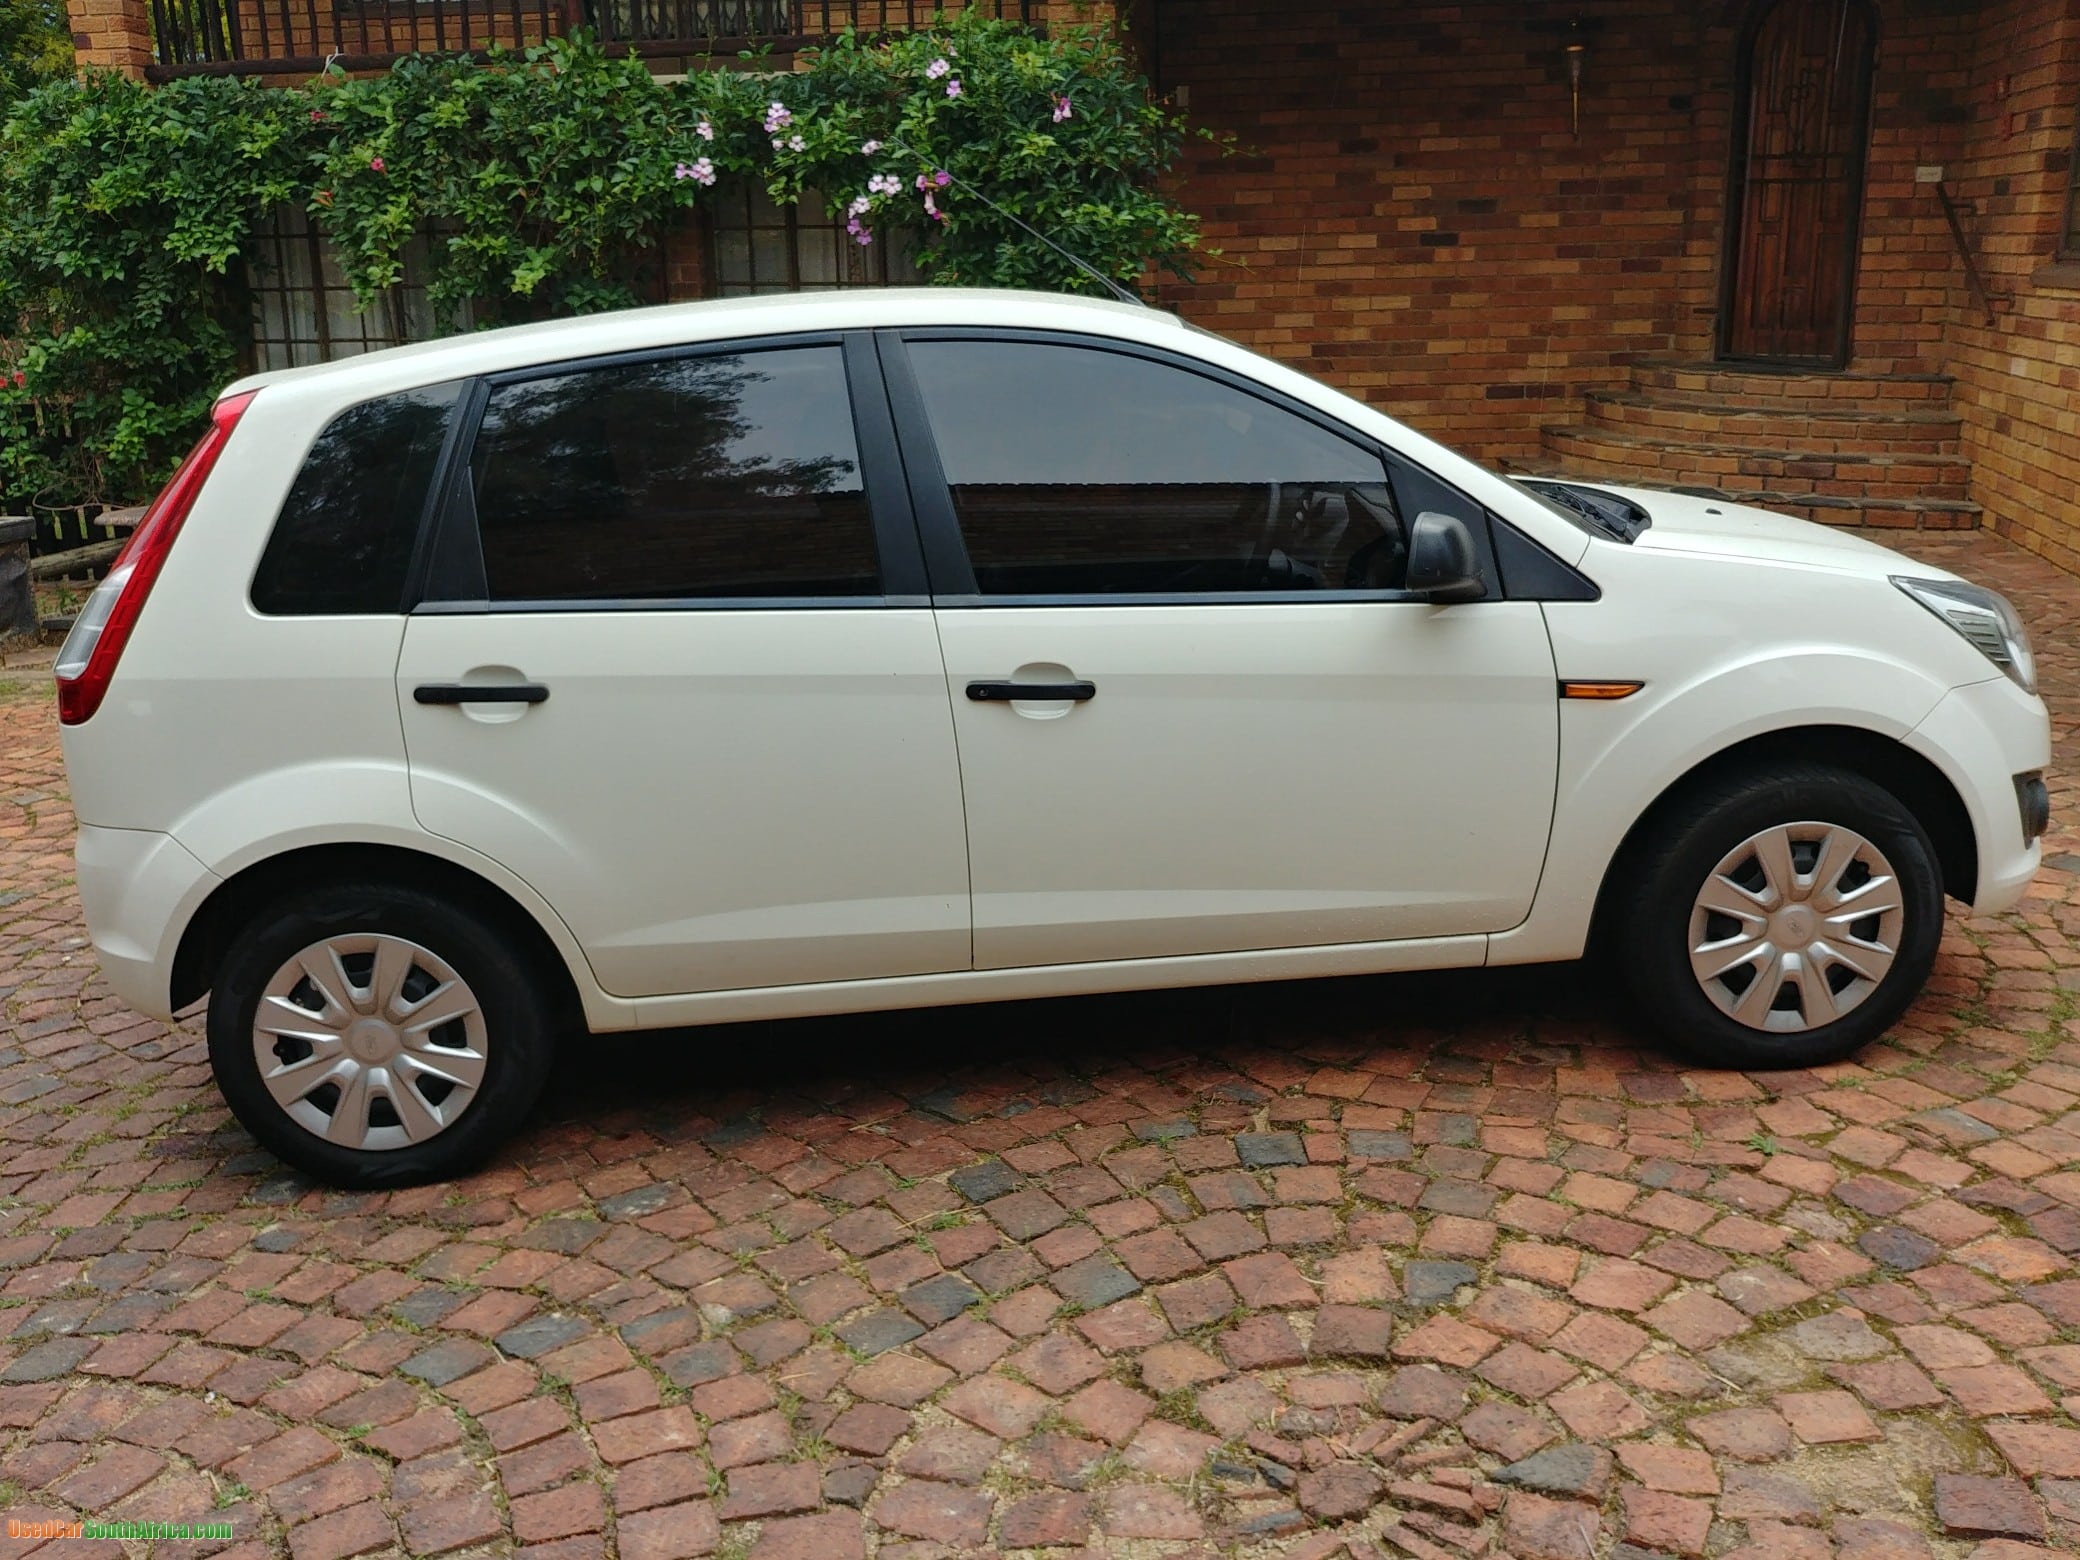 2014 Ford Figo 1.4 TDci used car for sale in Roodepoort Gauteng South ...